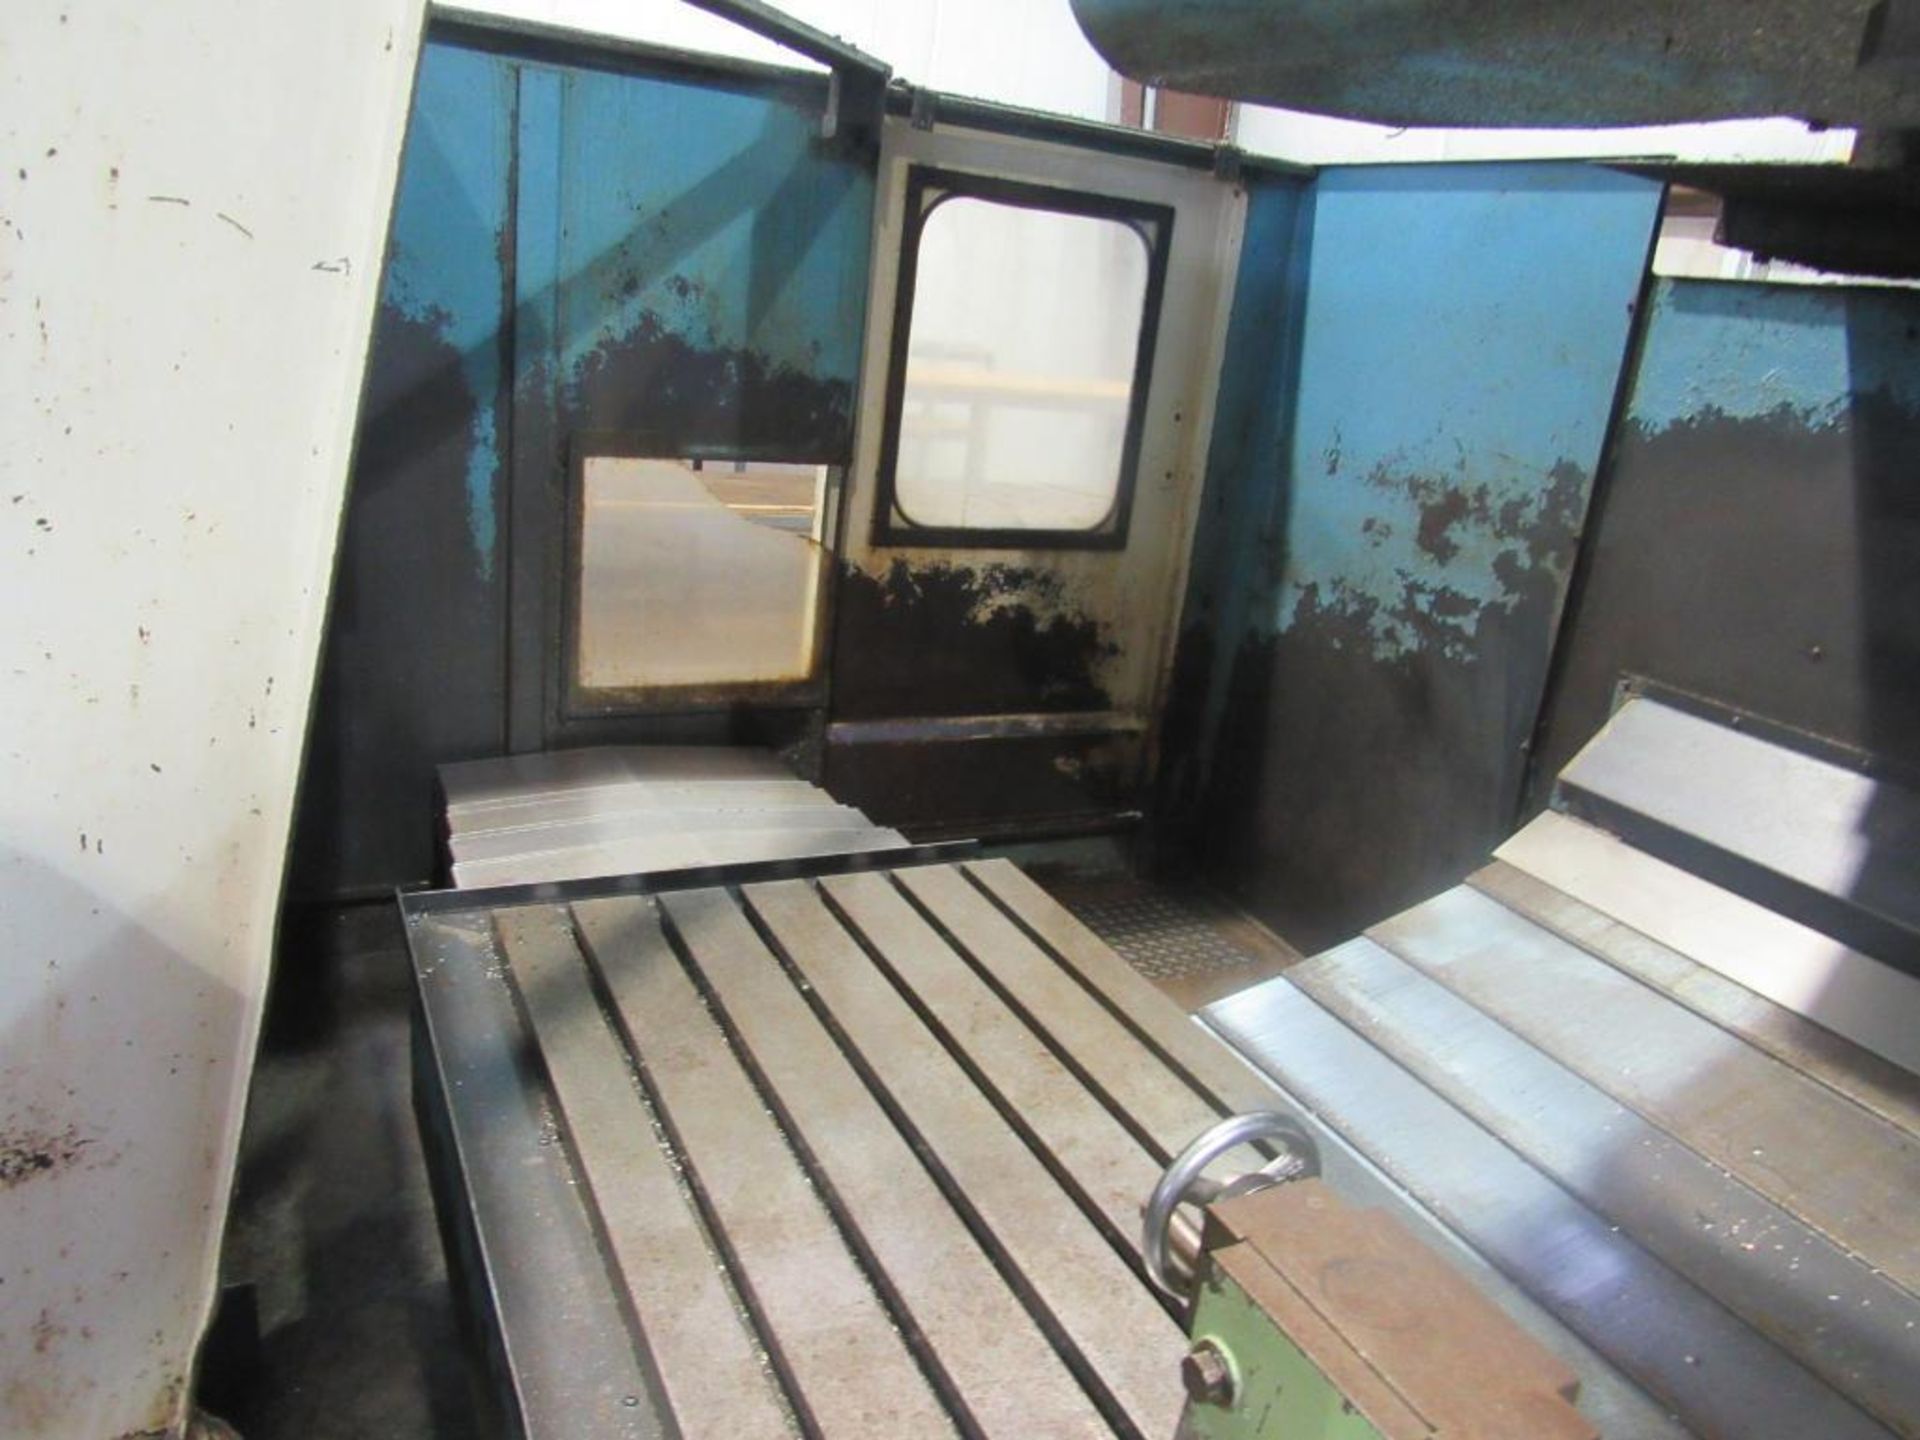 YCM Supermax MAX-8 / VMC-165A CNC Vertical Machining Center - Image 5 of 12